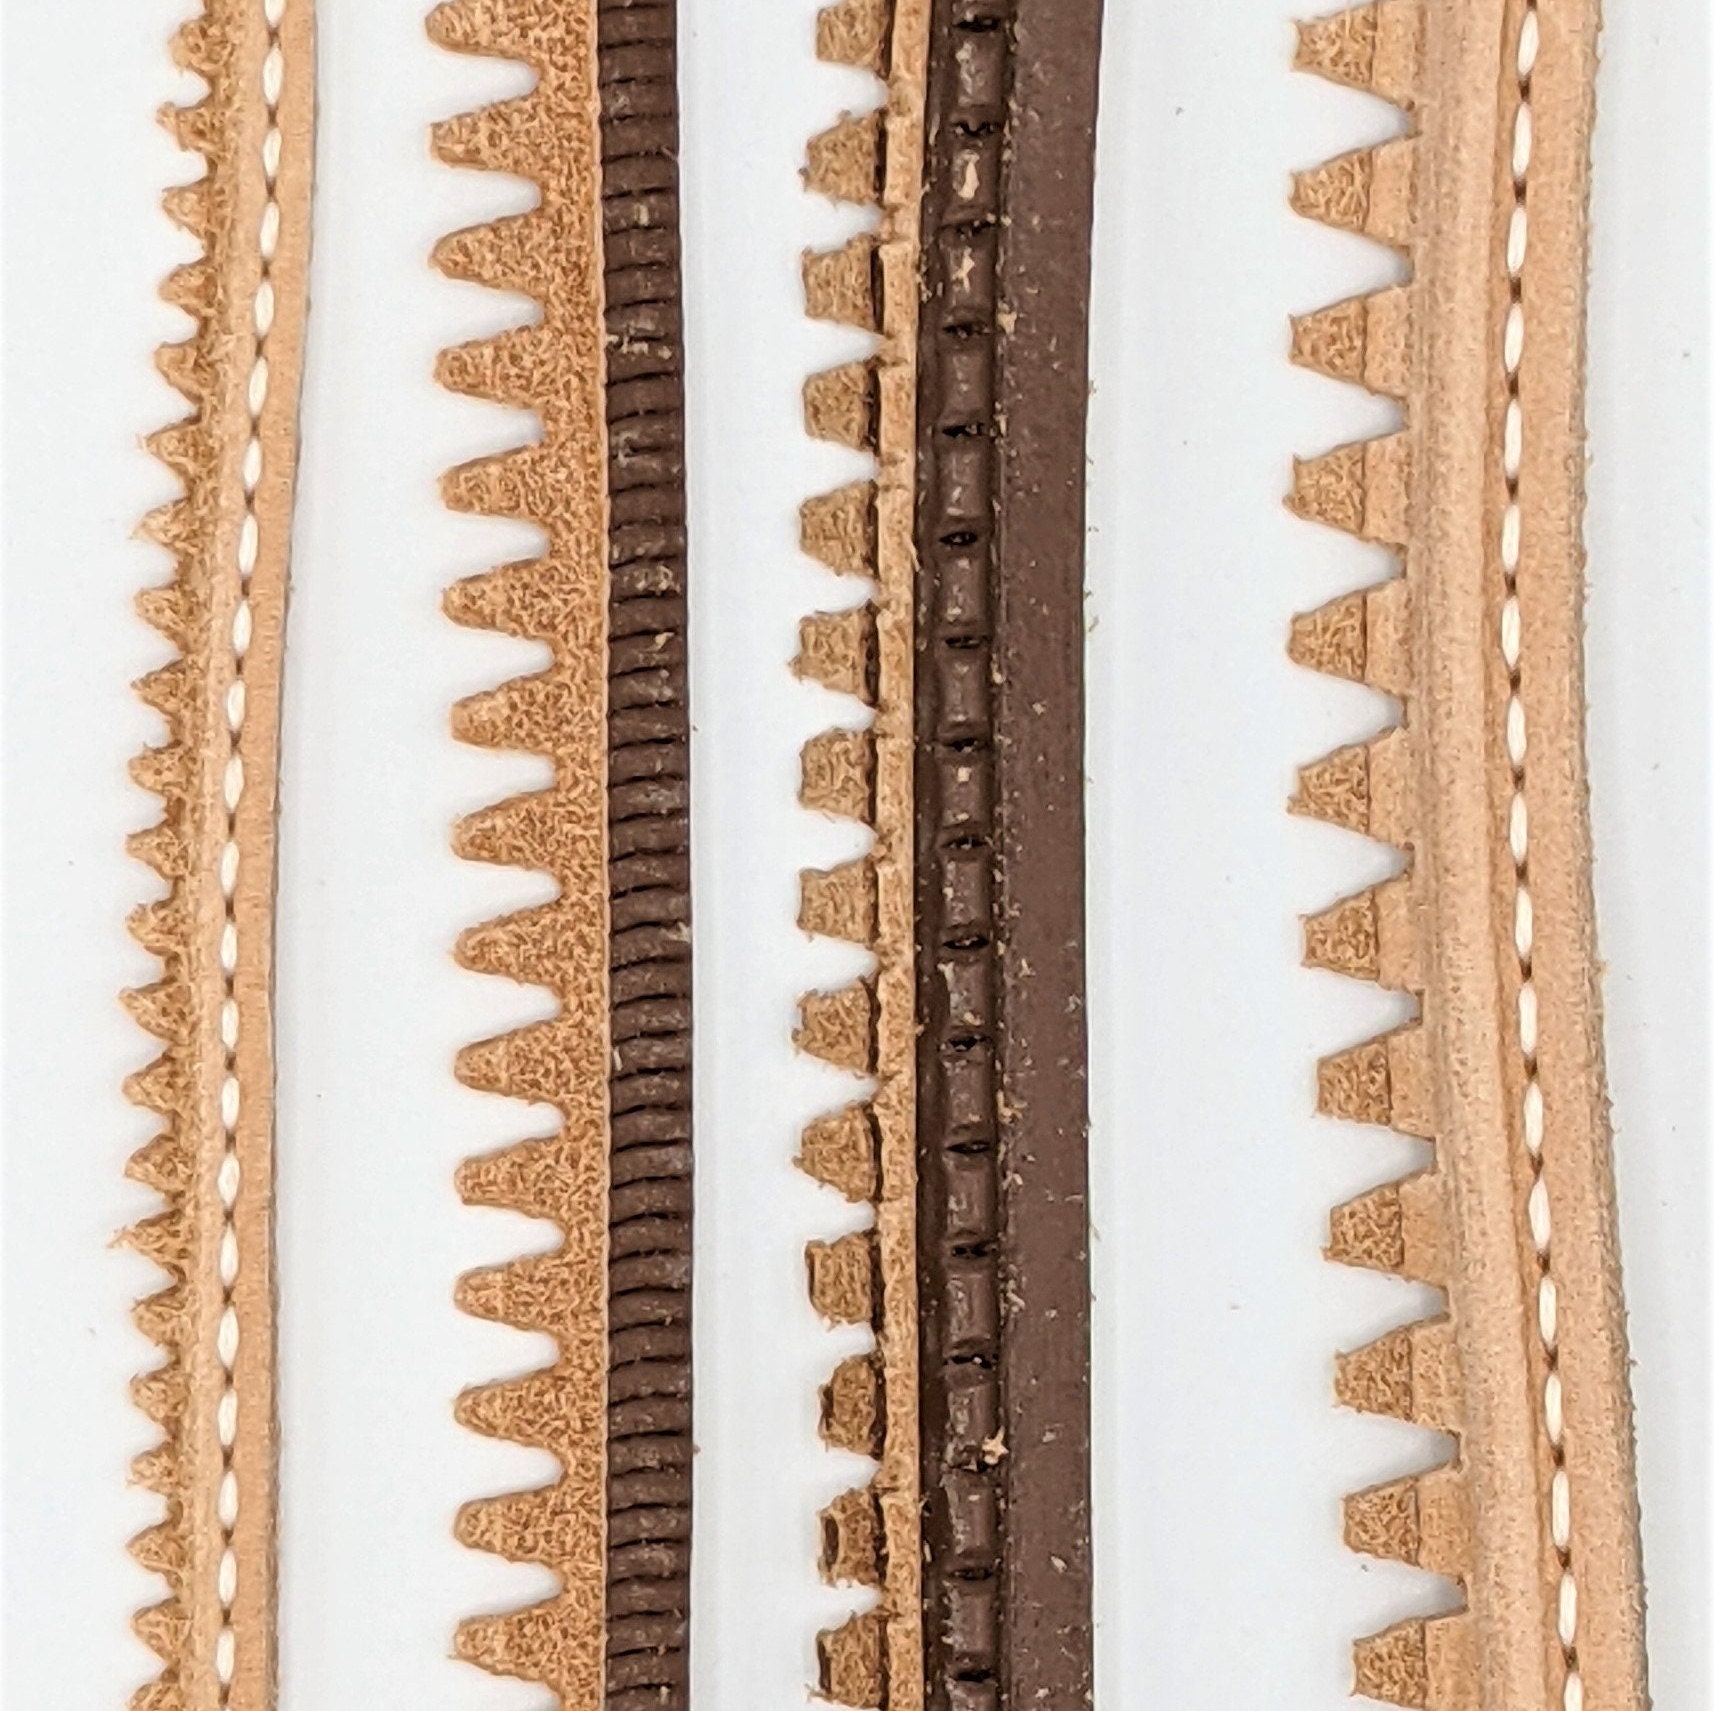 Different Types of Leather Used in Shoemaking